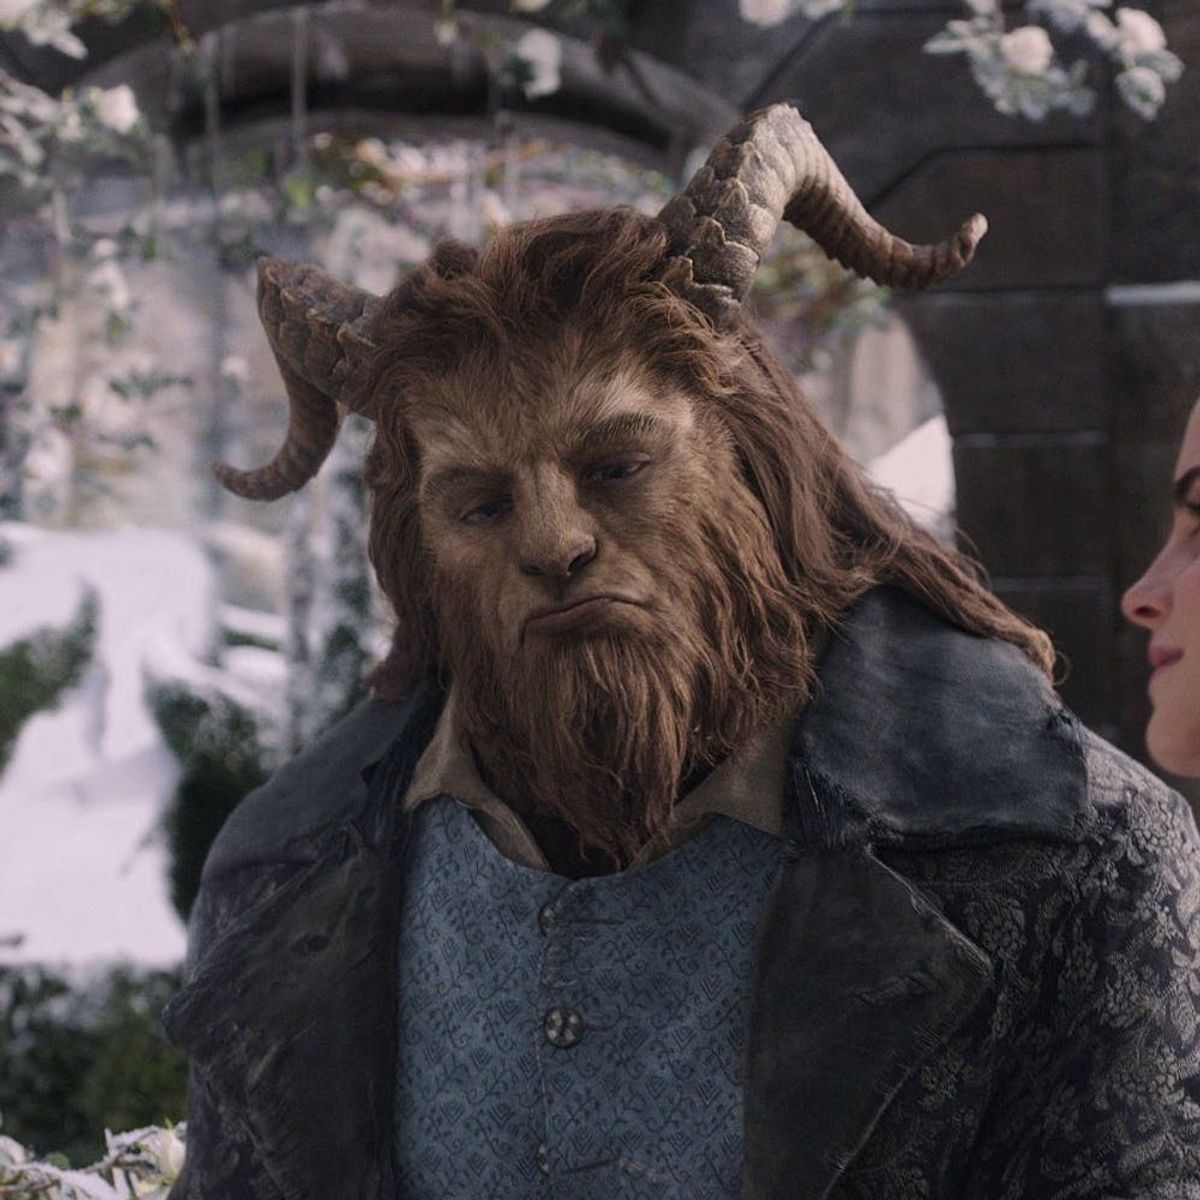 You’ll Freak Out When You See Dan Stevens’ Weird AF Beauty and the Beast Getup